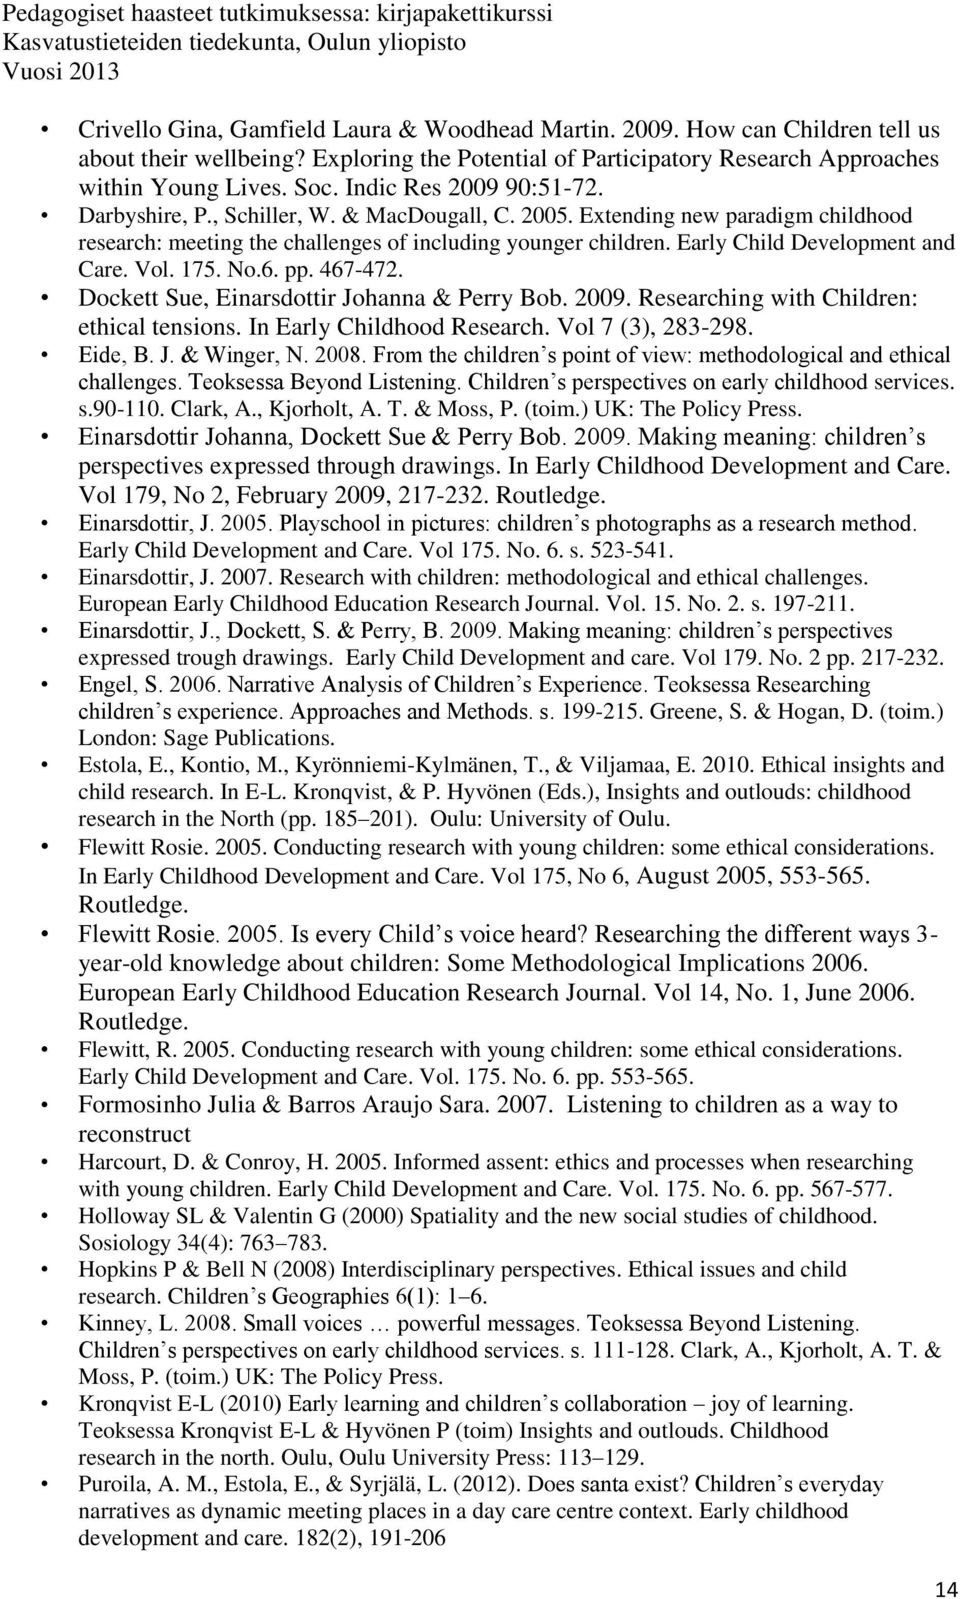 Early Child Development and Care. Vol. 175. No.6. pp. 467-472. Dockett Sue, Einarsdottir Johanna & Perry Bob. 2009. Researching with Children: ethical tensions. In Early Childhood Research.